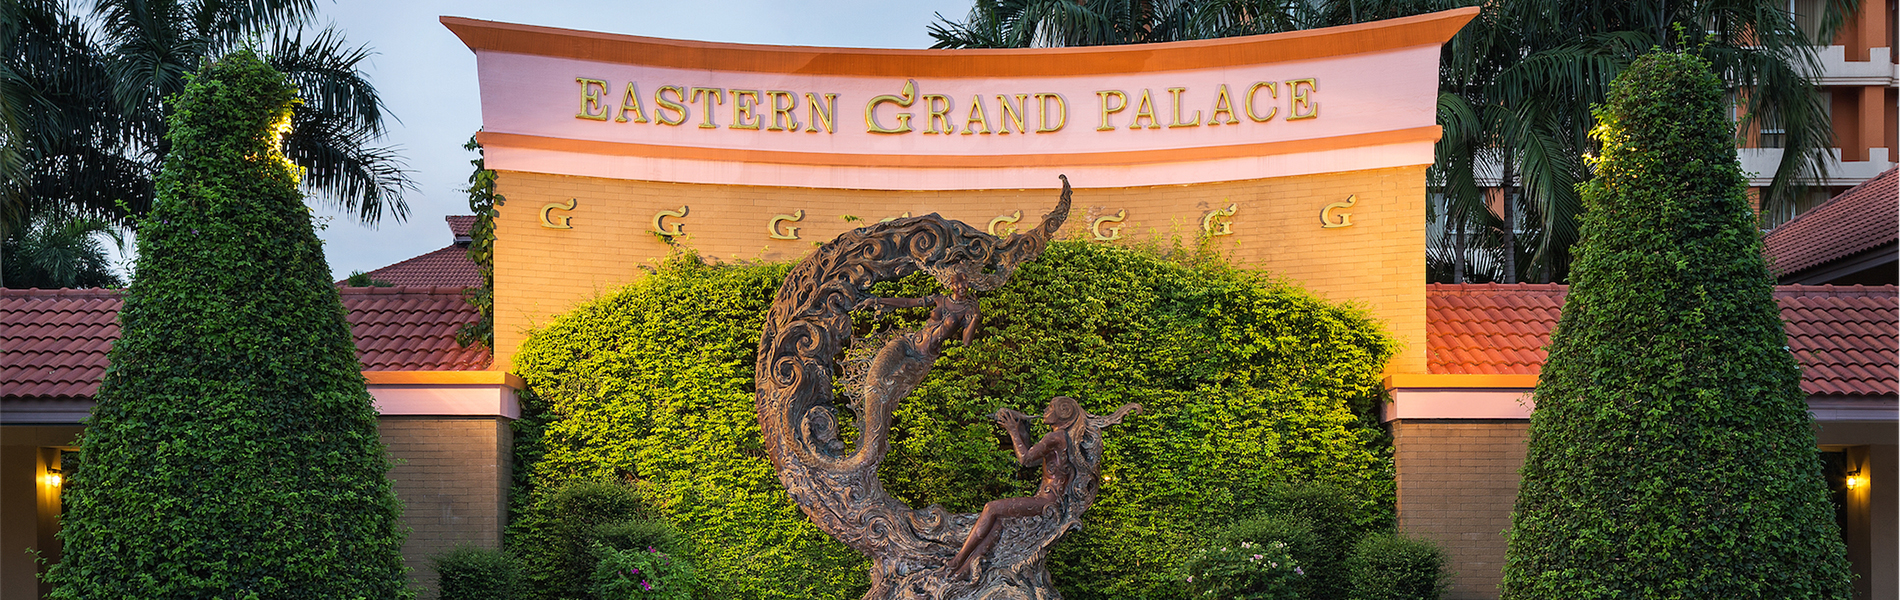 EASTERN GRAND PALACE HOTEL